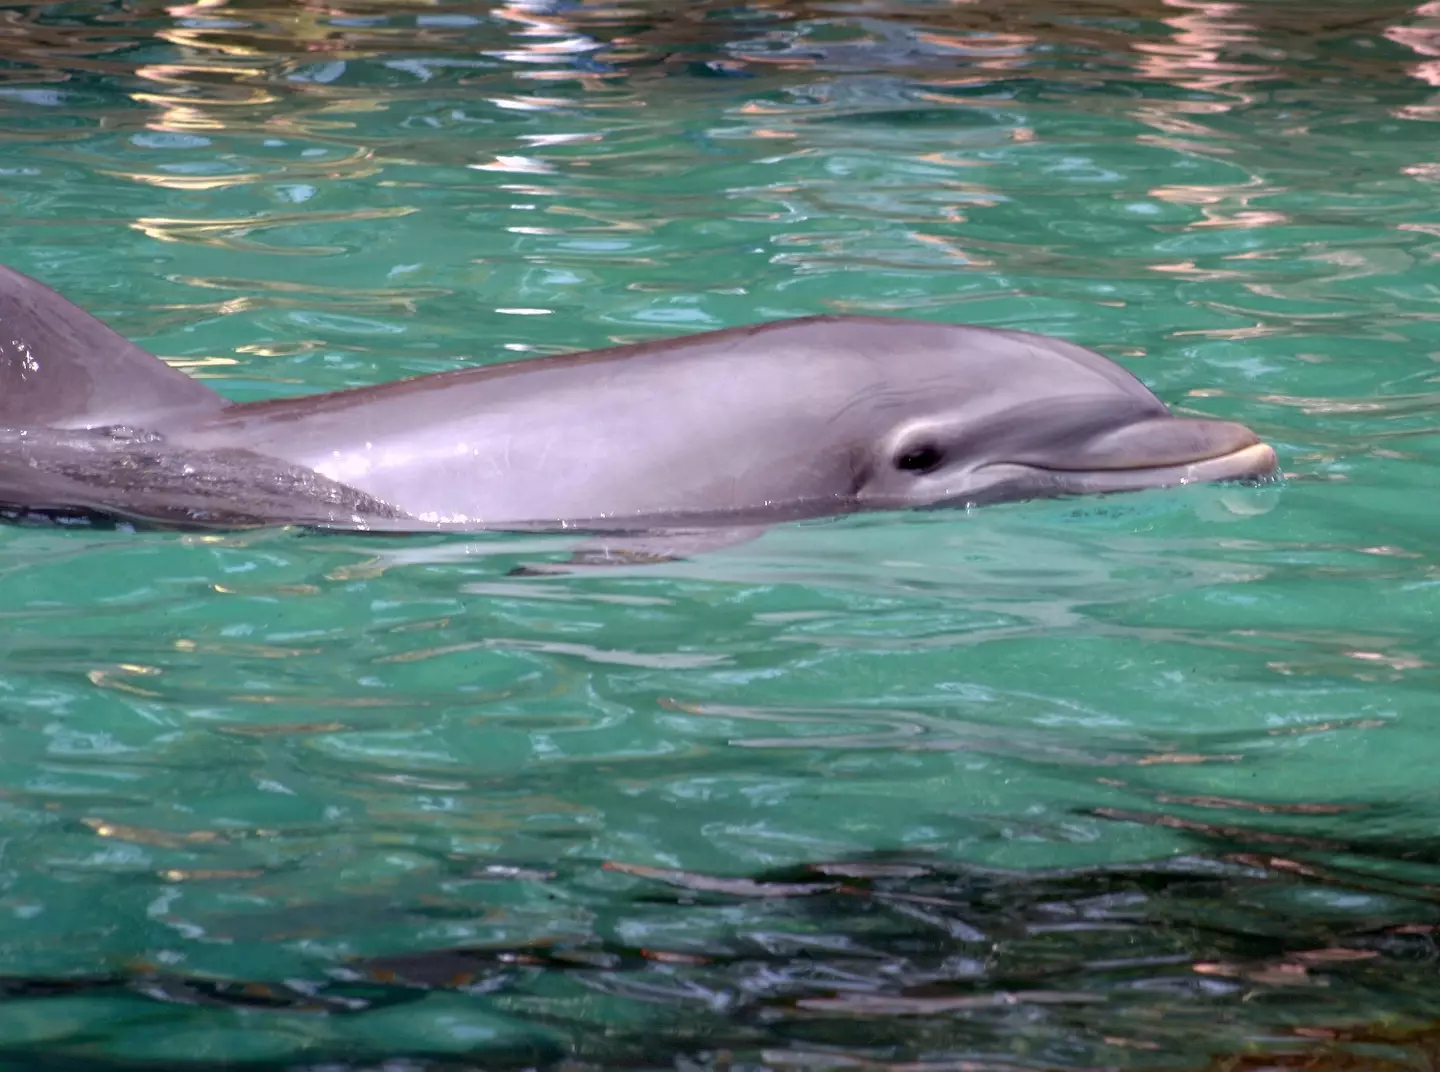 Researchers have found that small holes on a dolphin's snout can detect weak electric currents in water.